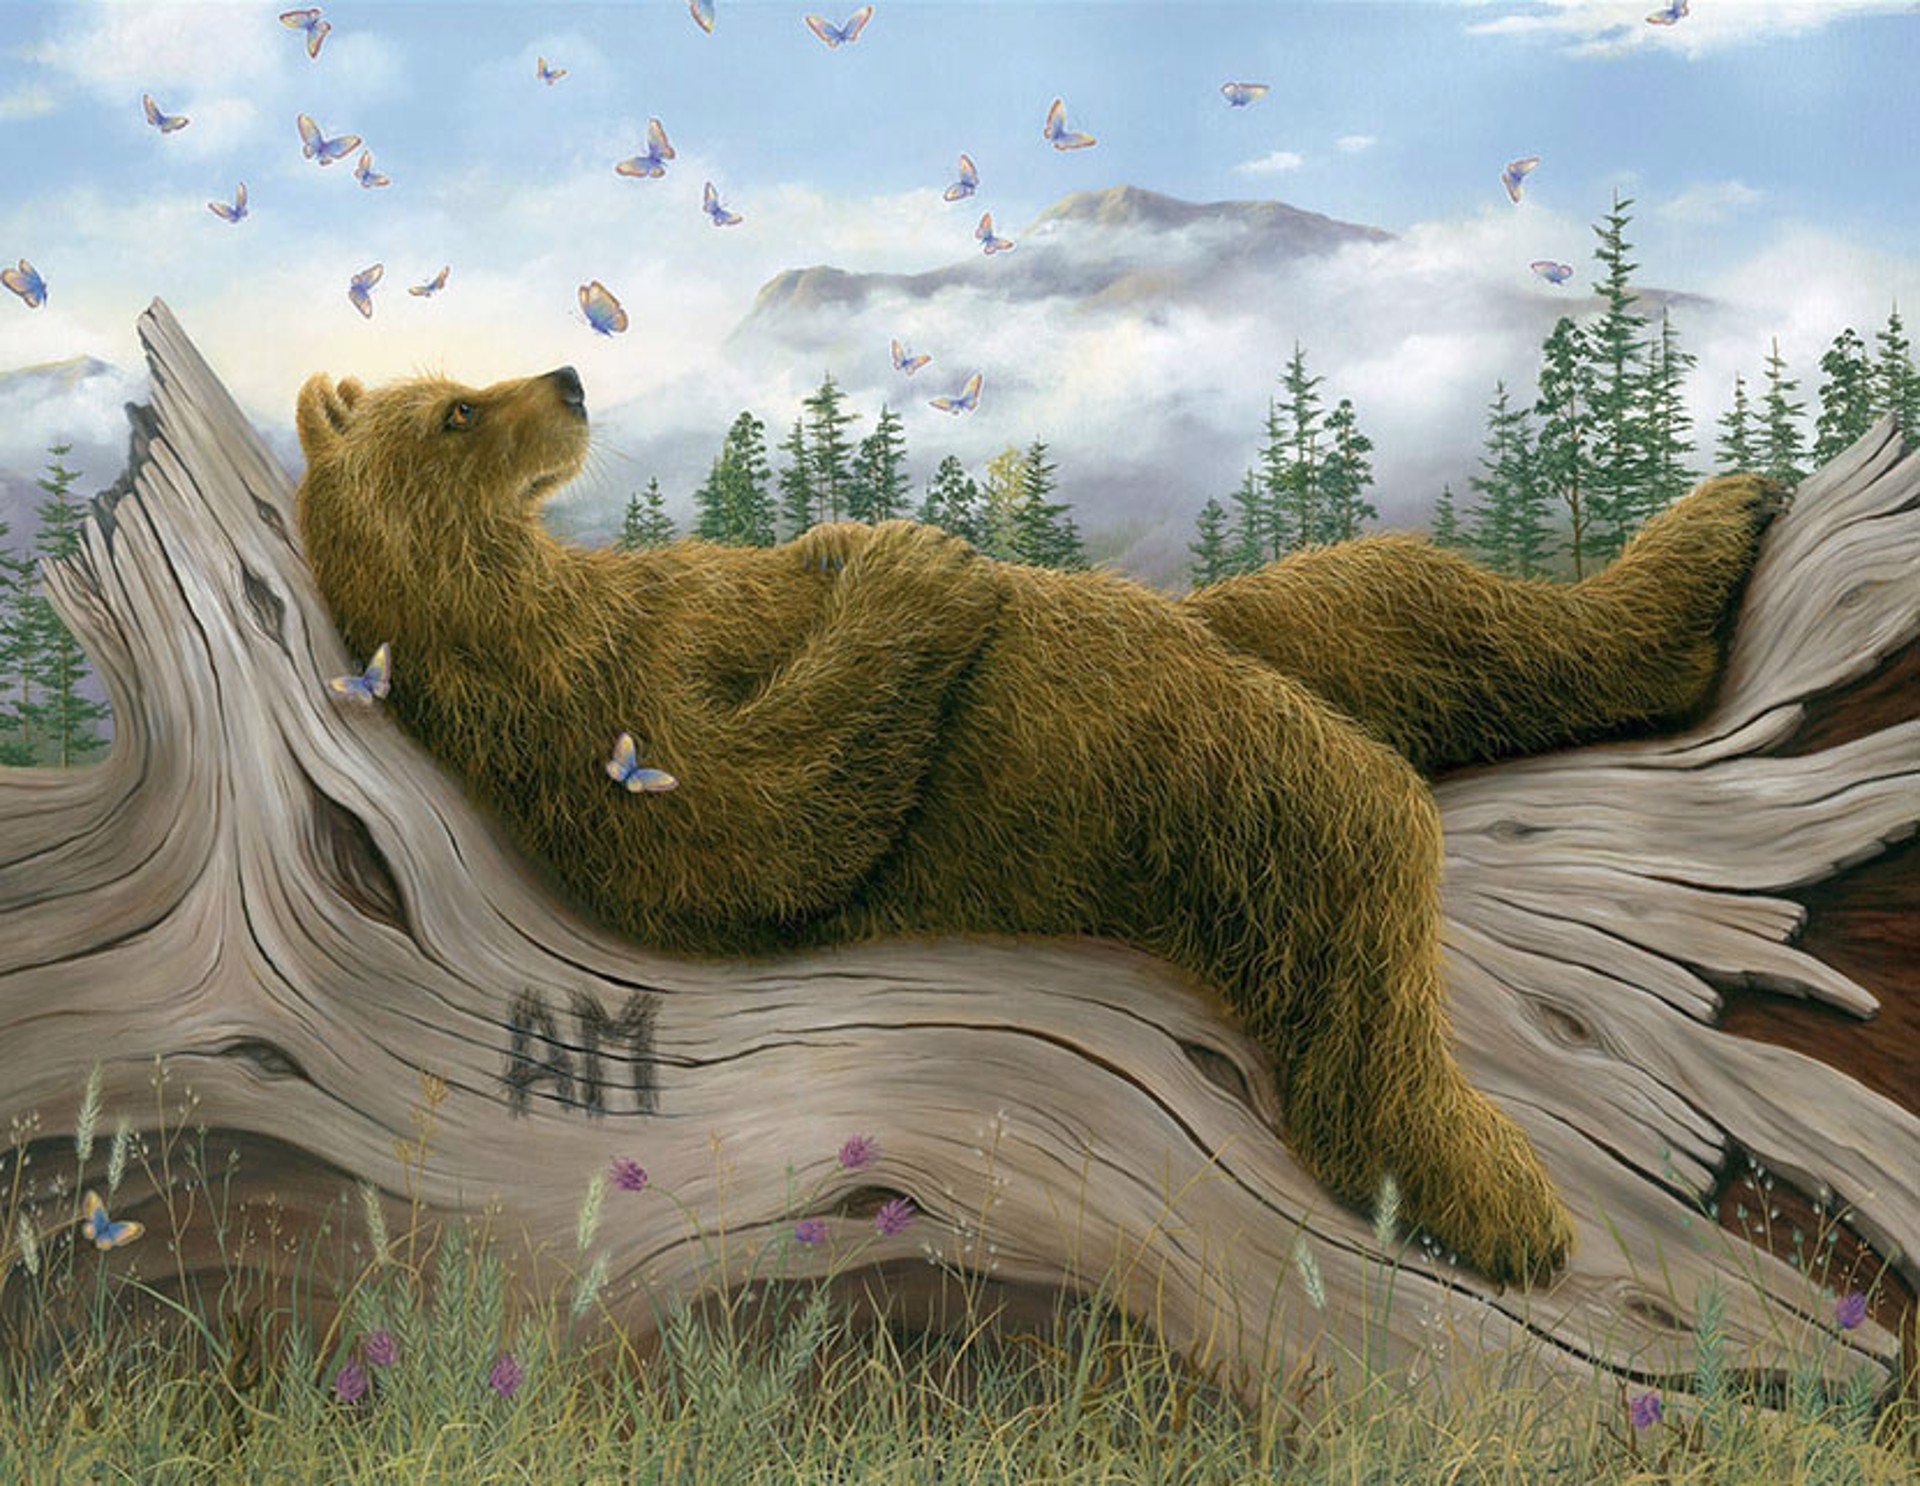 Am II by Robert Bissell